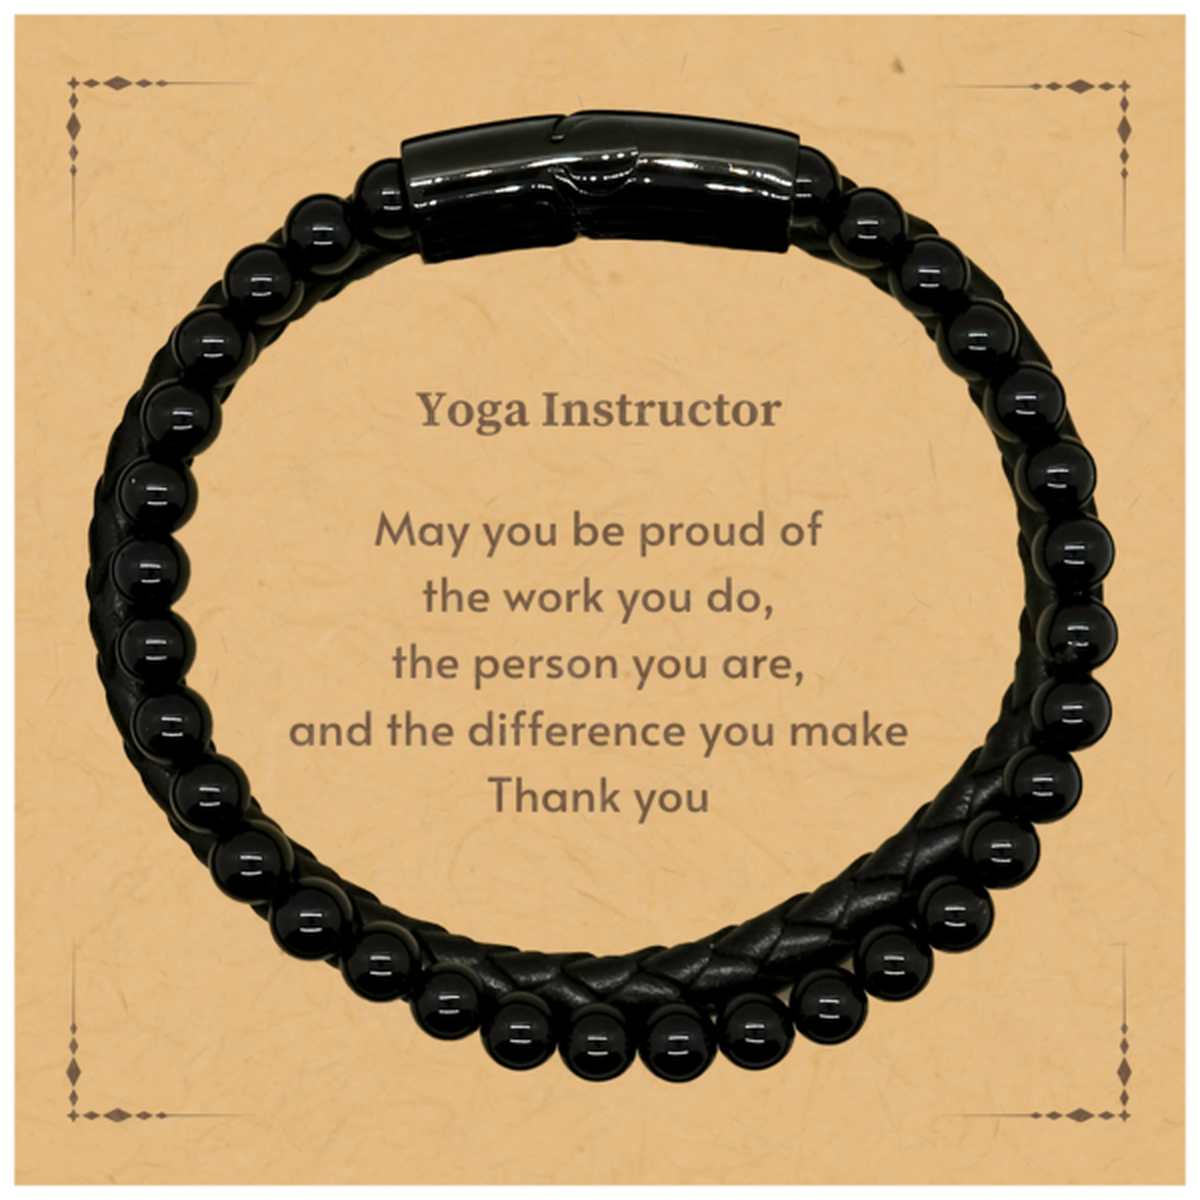 Heartwarming Stone Leather Bracelets Retirement Coworkers Gifts for Yoga Instructor, Yoga Instructor May You be proud of the work you do, the person you are Gifts for Boss Men Women Friends